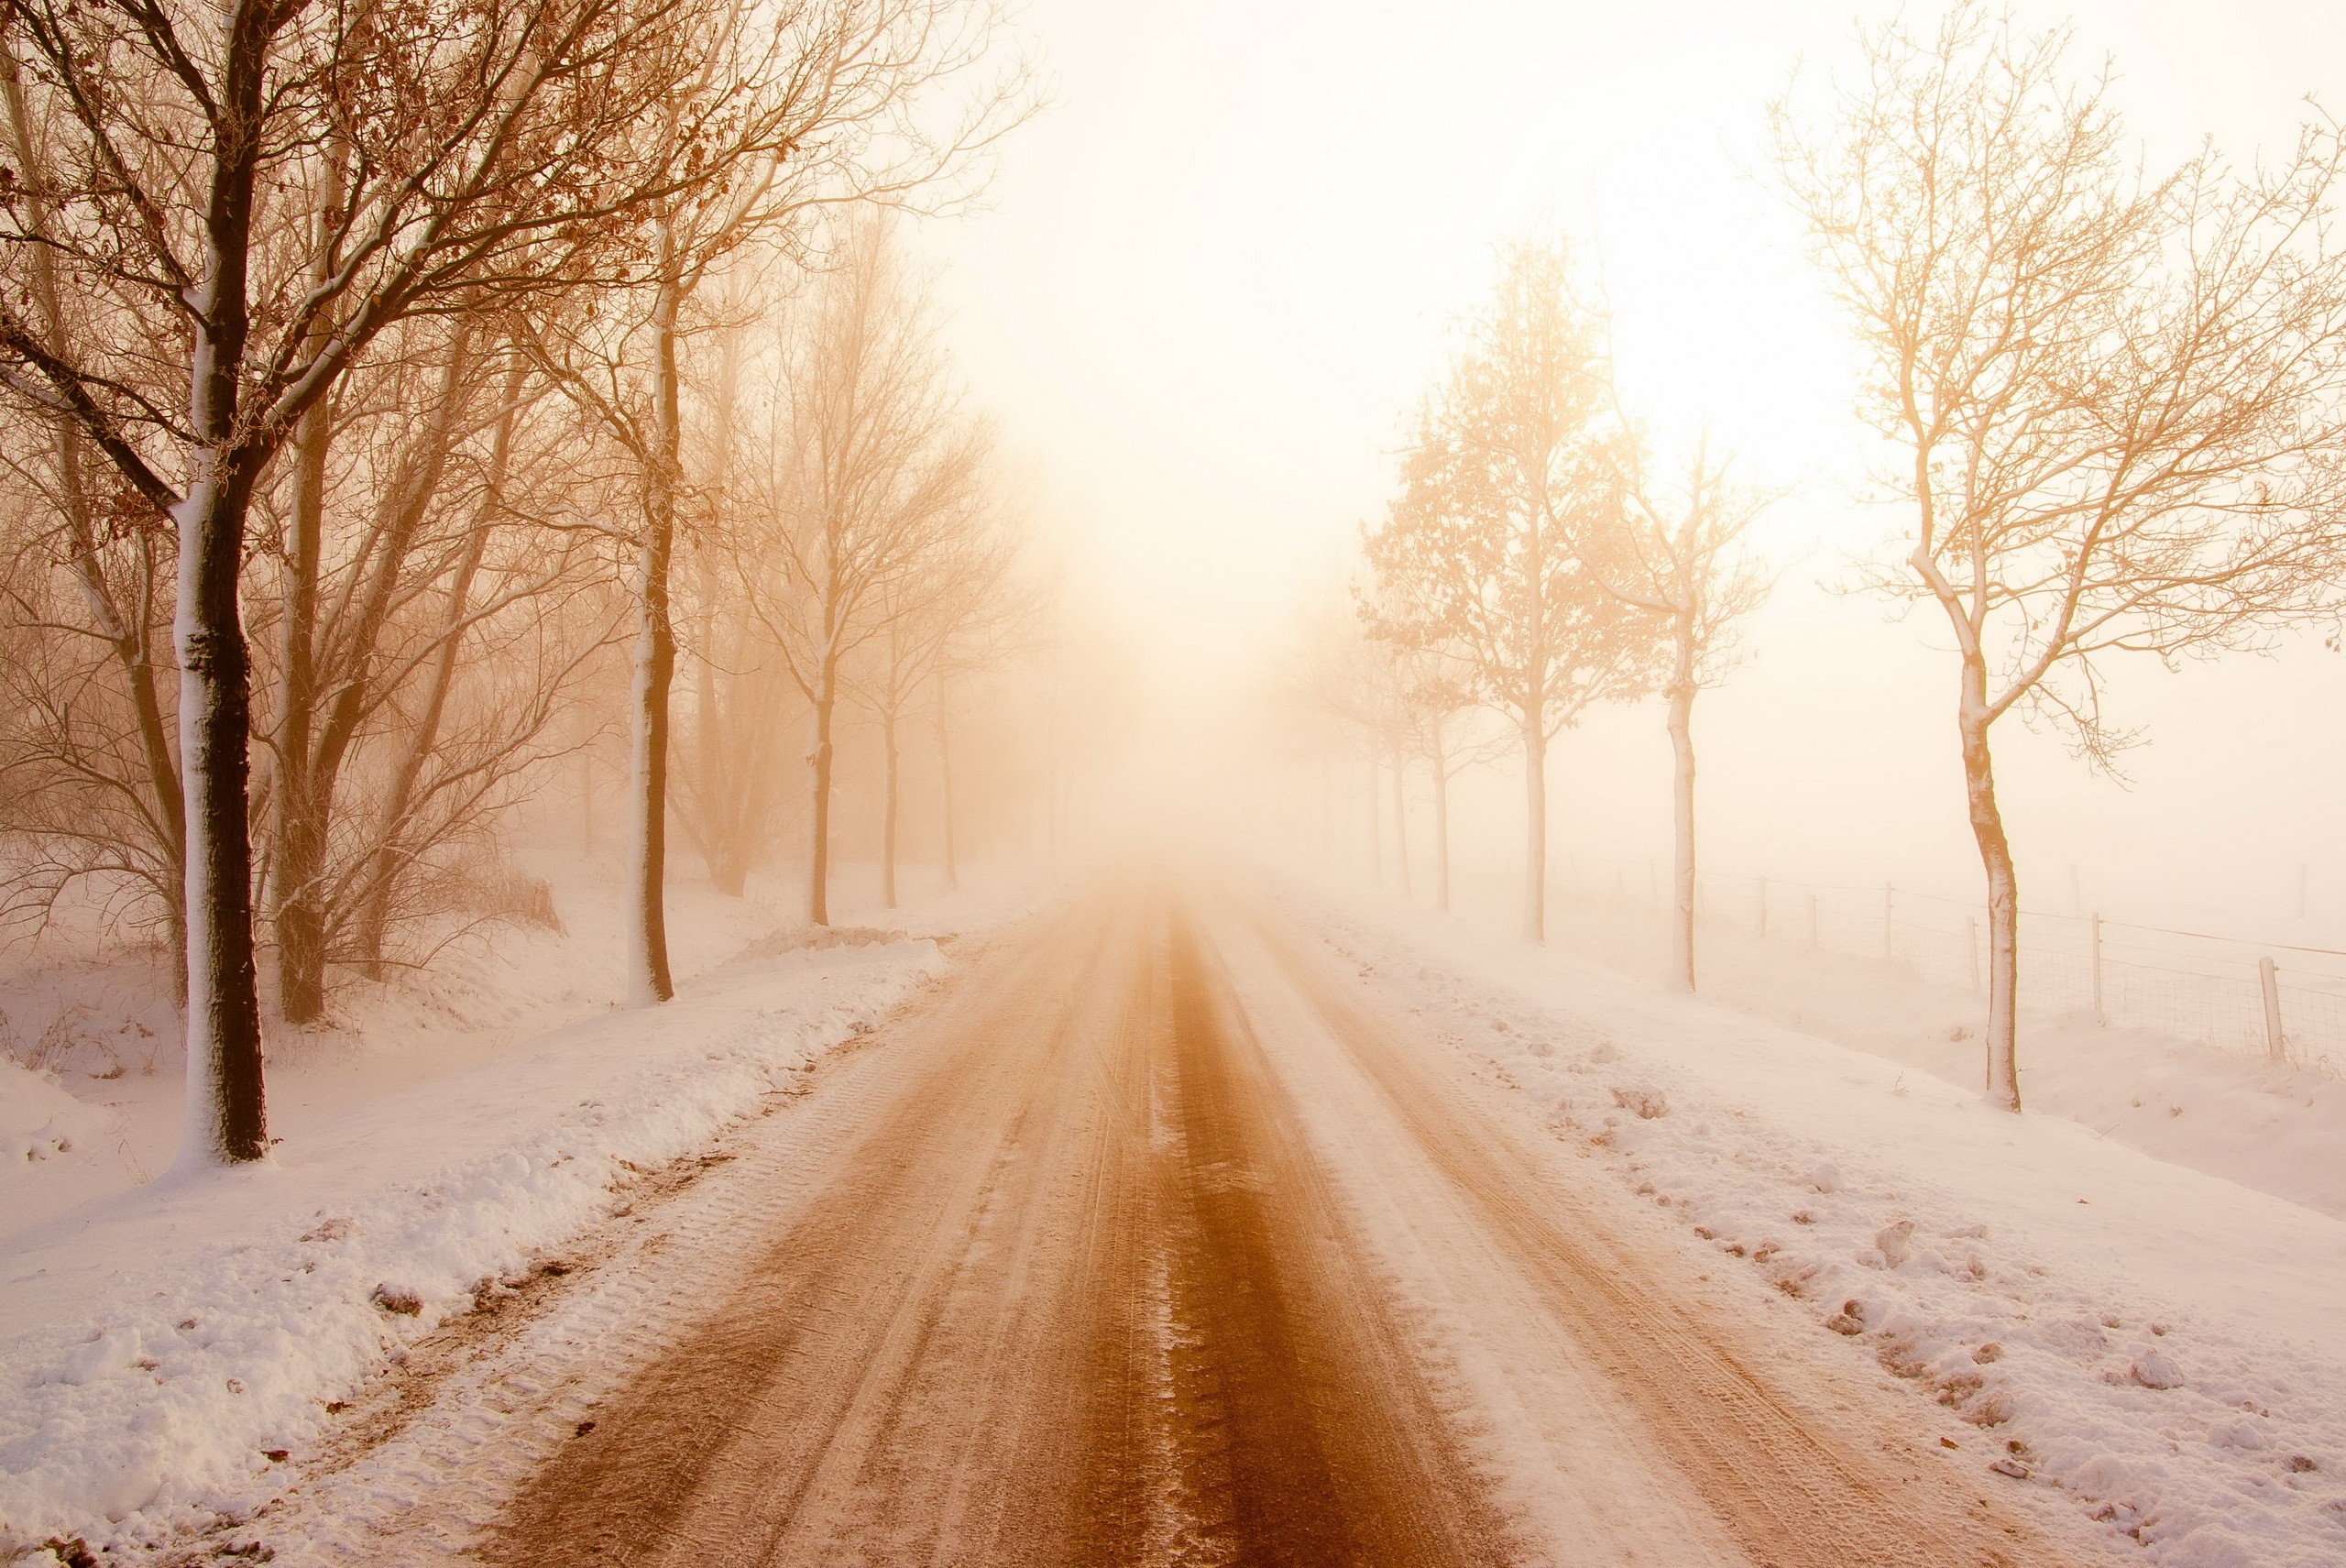 General 2560x1711 trees street road dirt road mist brown nature bright winter cold outdoors ice snow